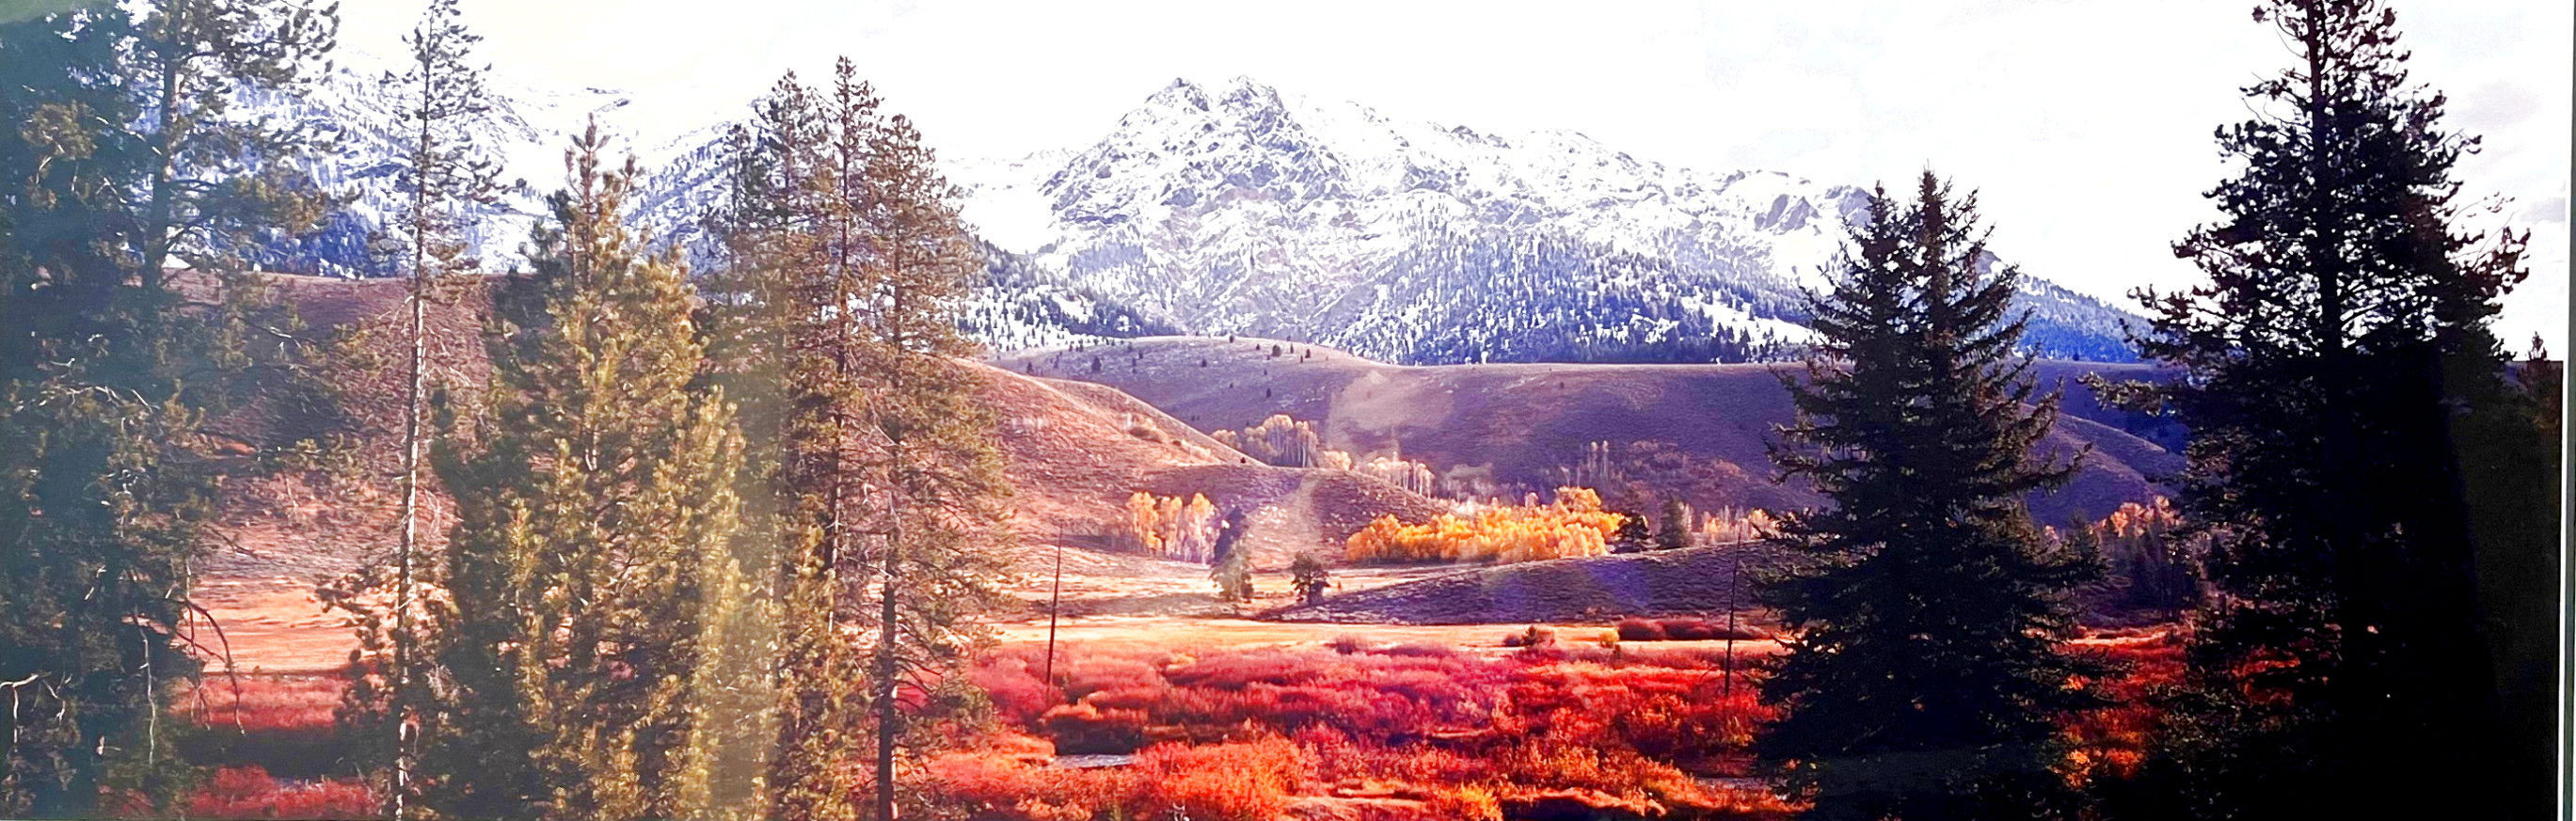 Last Days of Fall 2000 1M  Panorama by Thomas Mangelsen